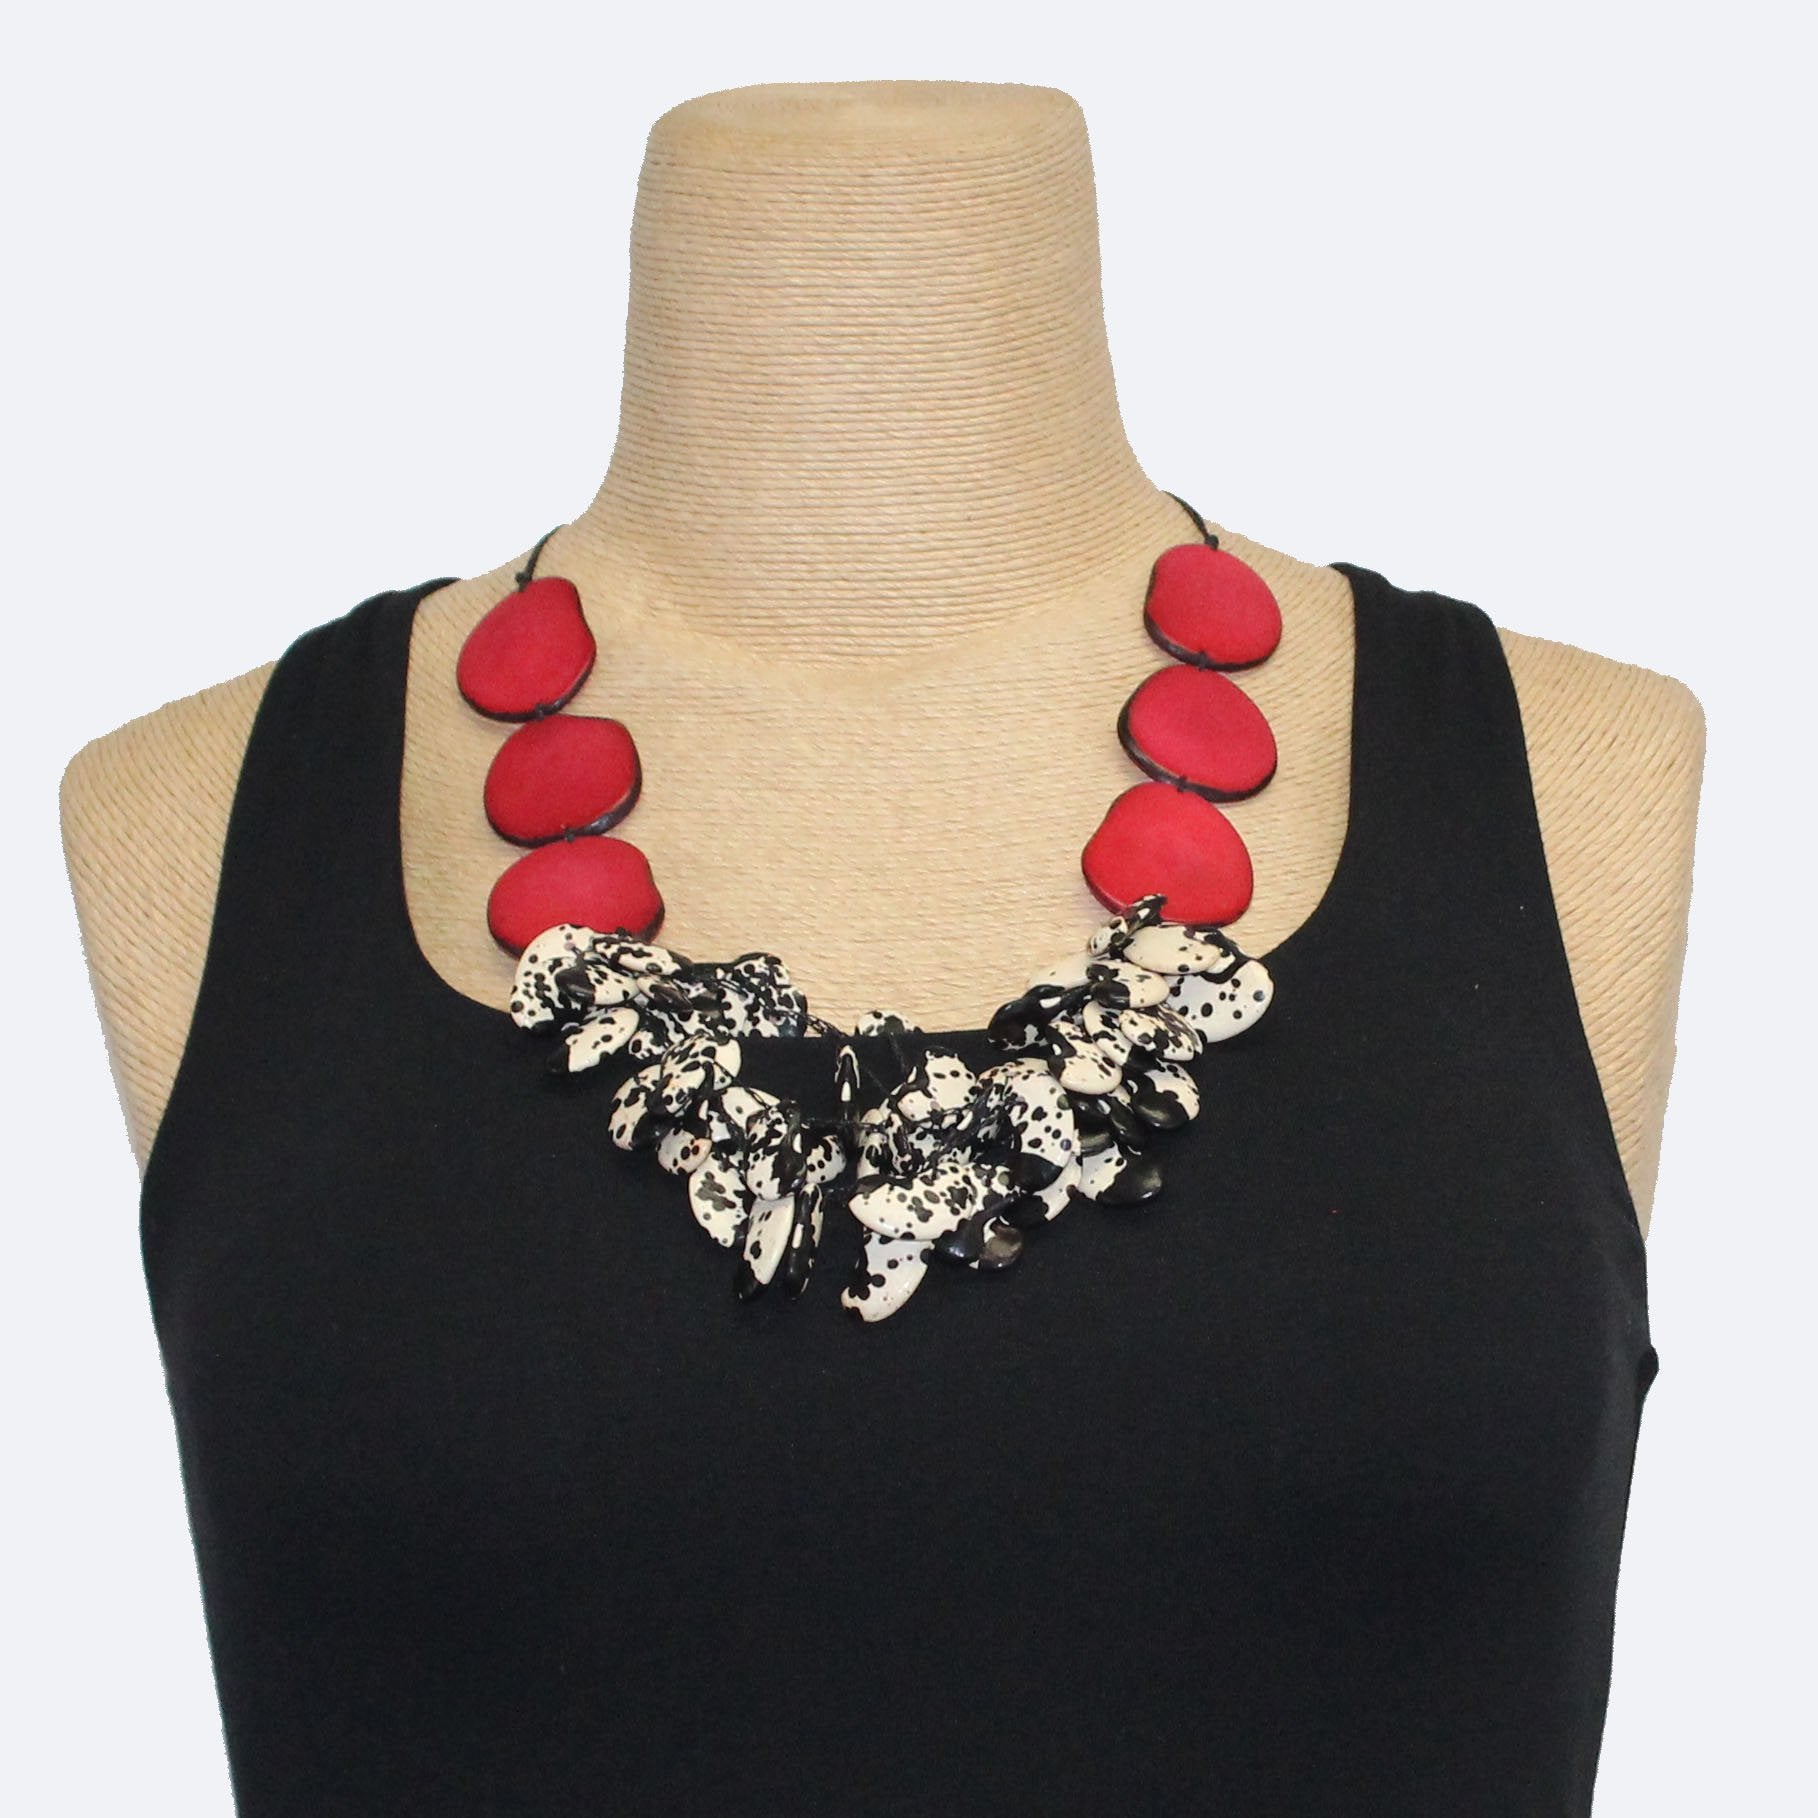 Lula Castillo Necklace, Lima Beans and Red Tagua Nuts